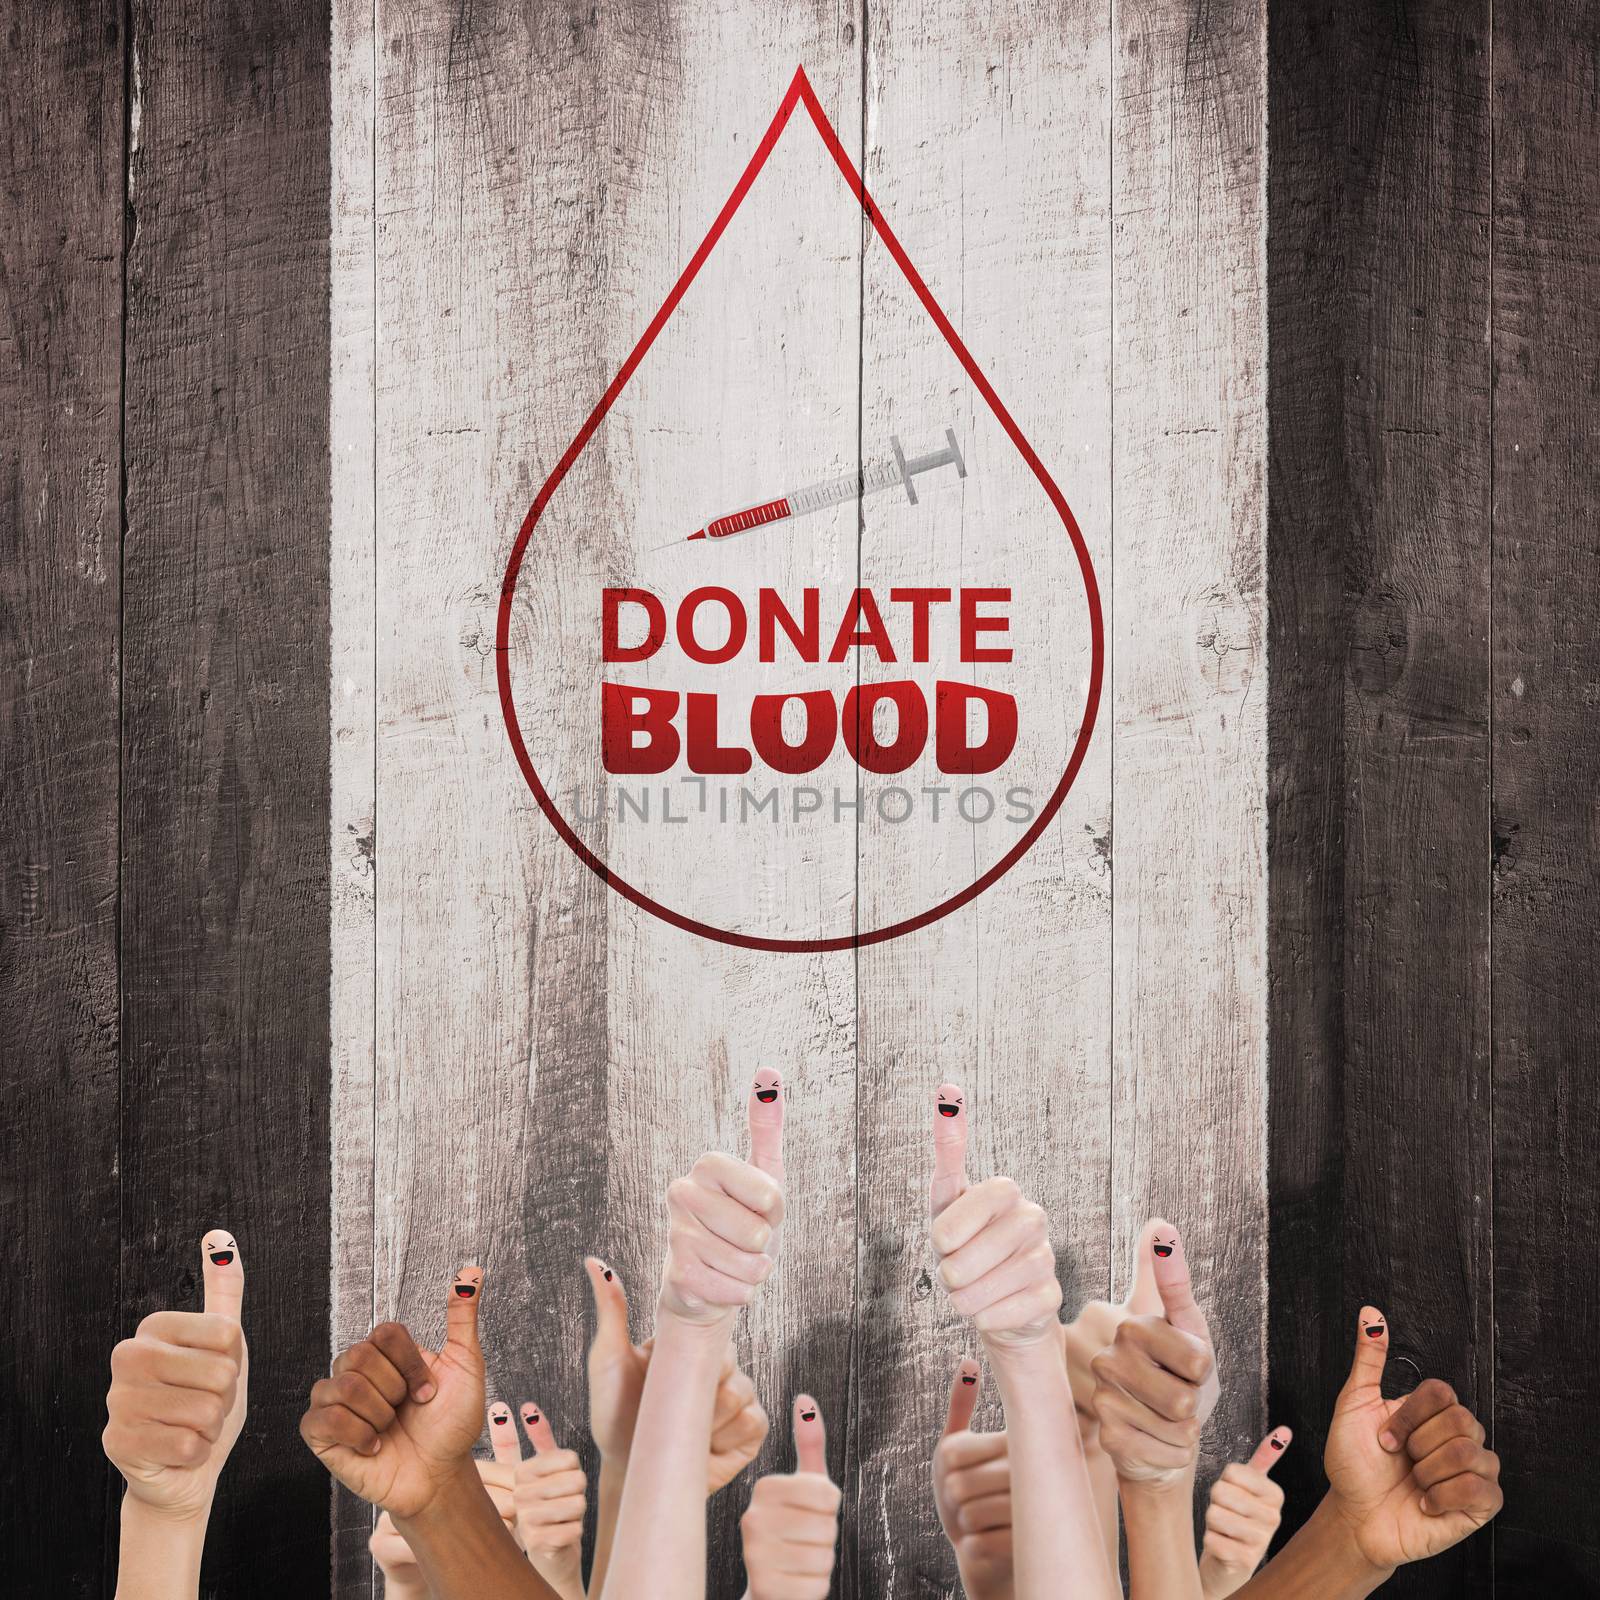 donate blood against weathered oak floor boards background